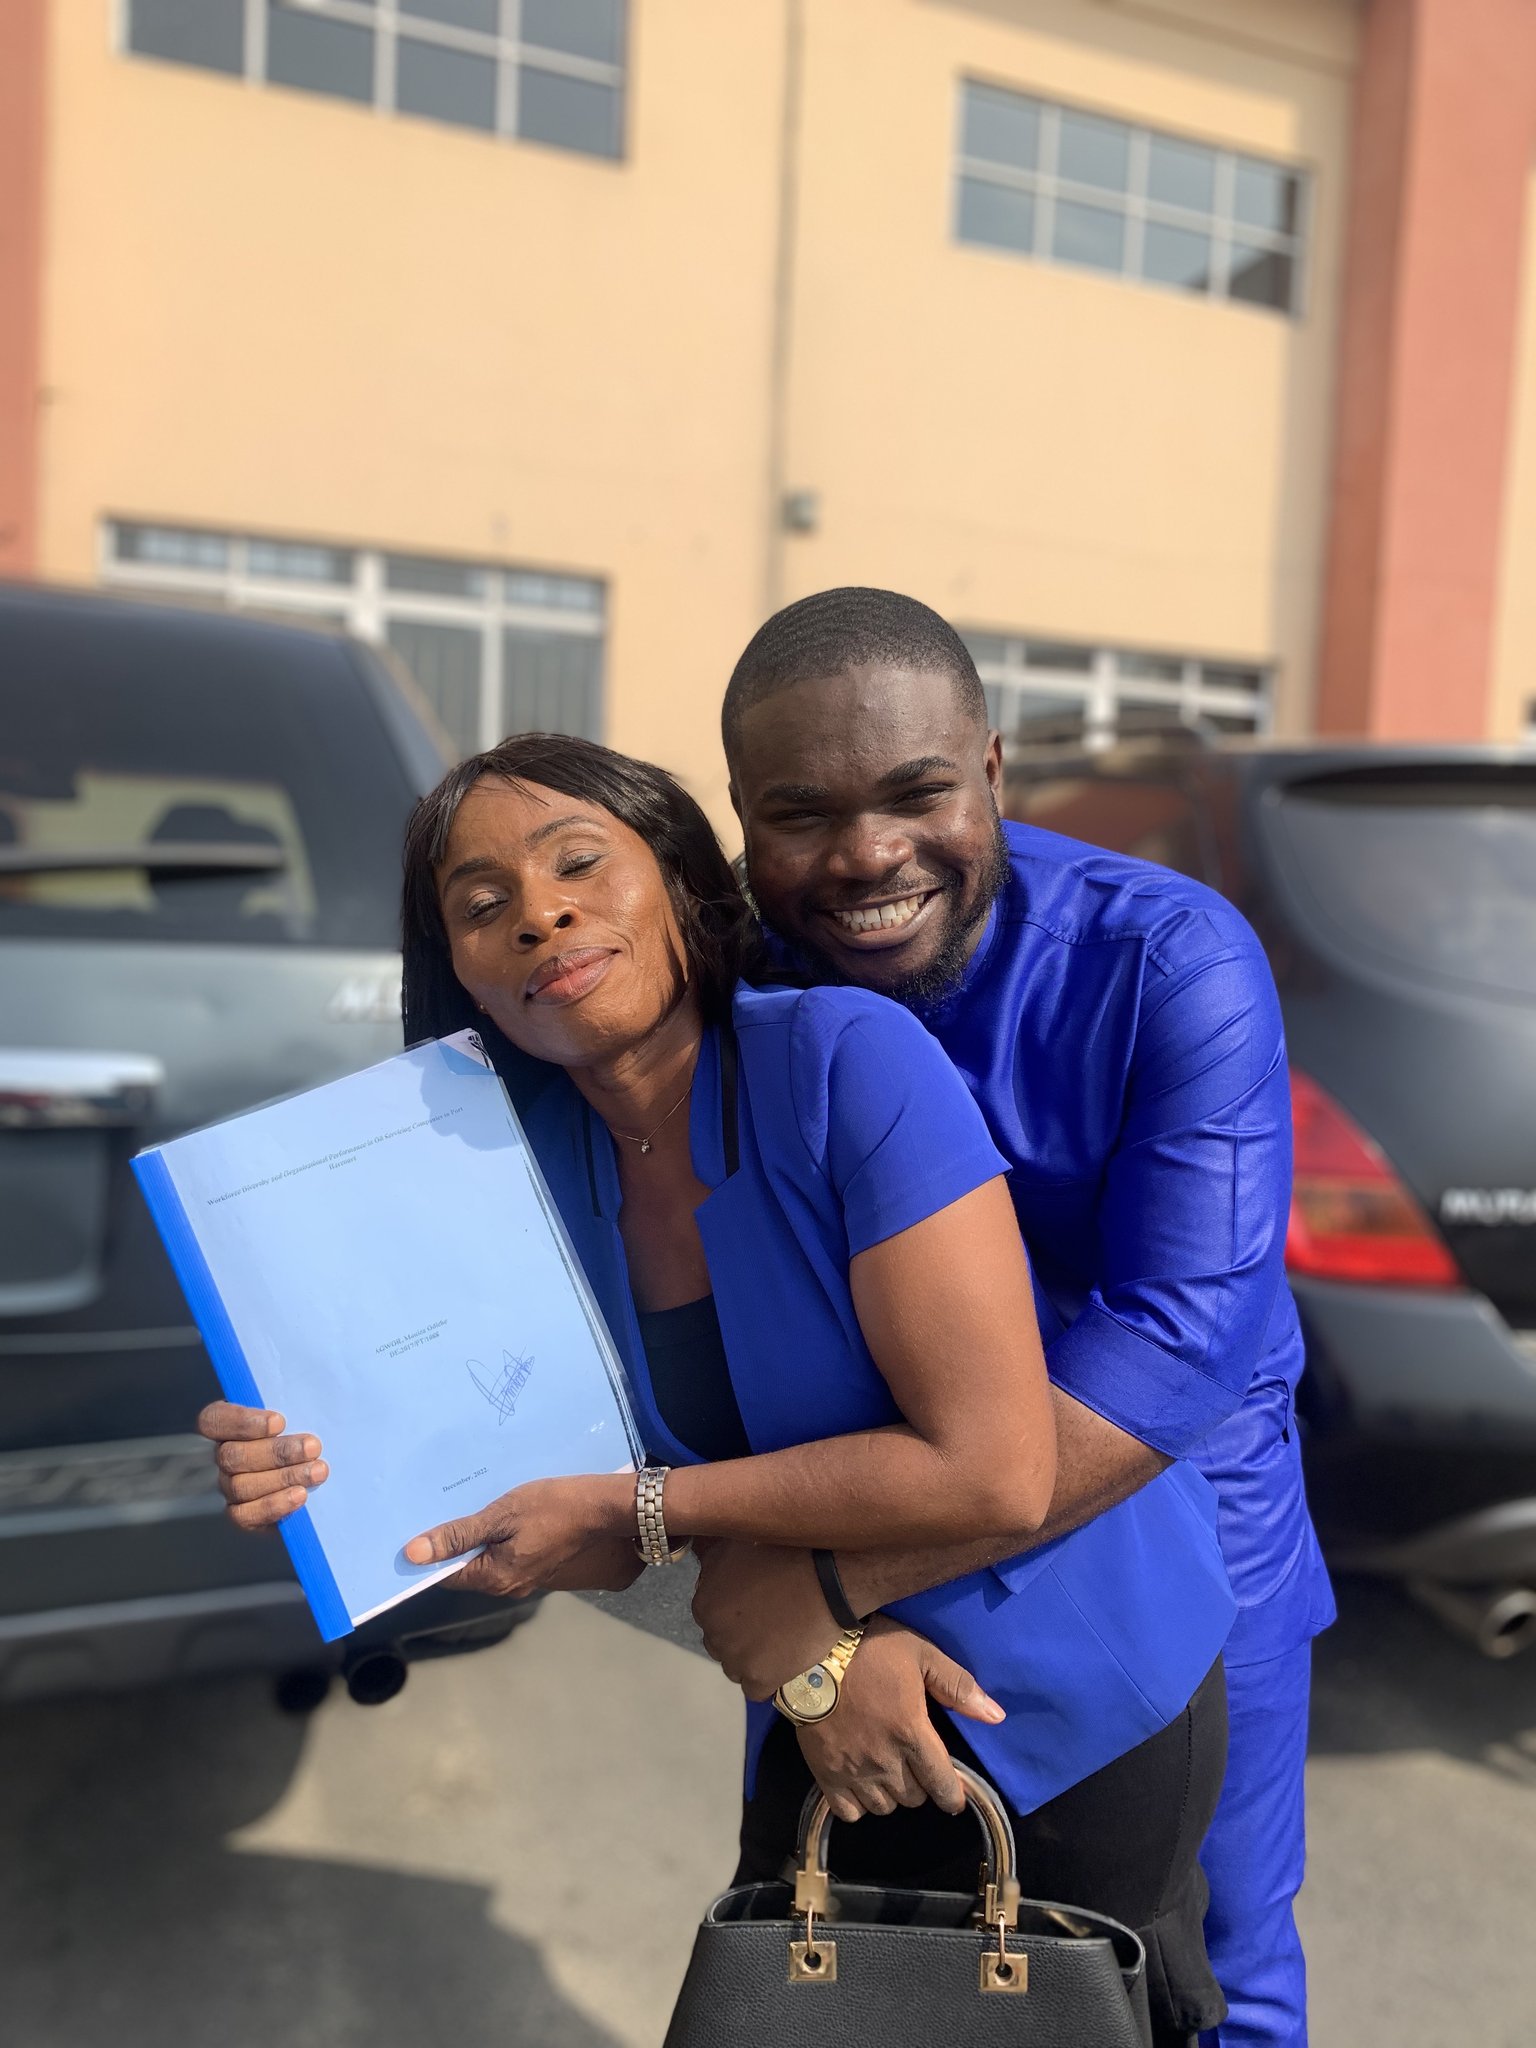 Man celebrates his mom becoming a graduate 20 years after dropping out to cater for him - man mother graduation 20 years